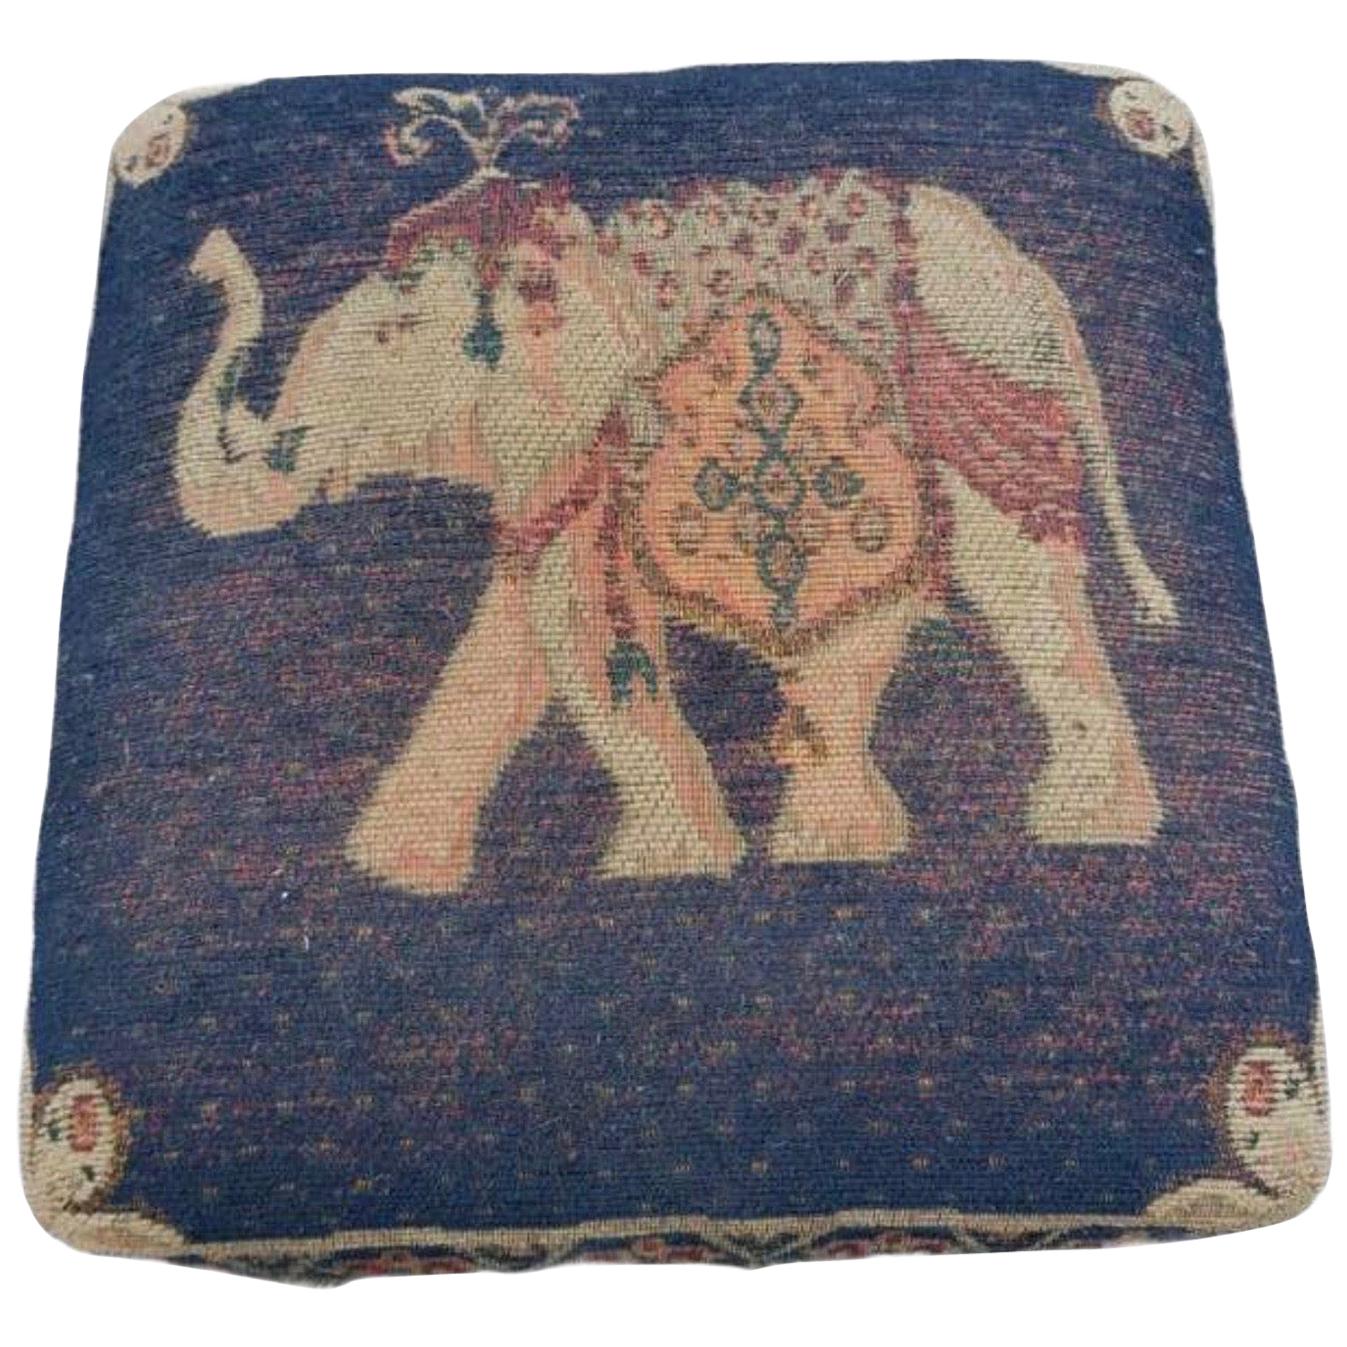 Gorgeous oriental pillow or seat pillow. Handmade of woolen salt bag or Oriental rug. A beautiful item to put on your leather sofa or a bench.